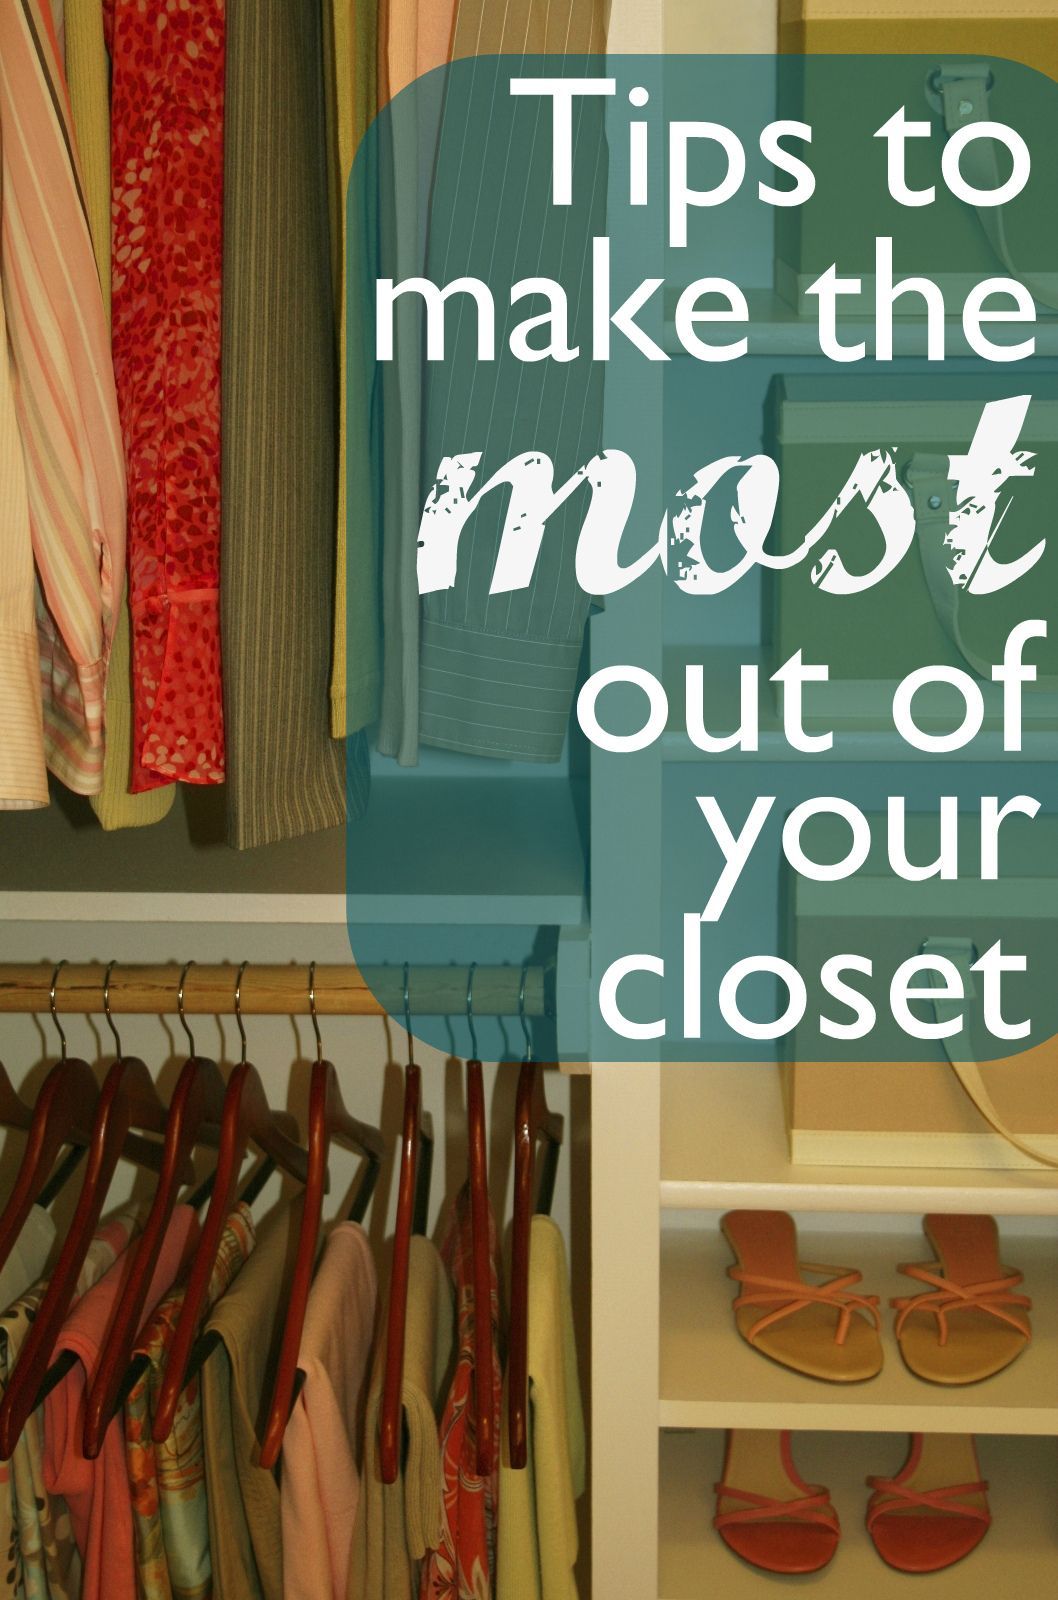 Make the most of your closet space – great advice!